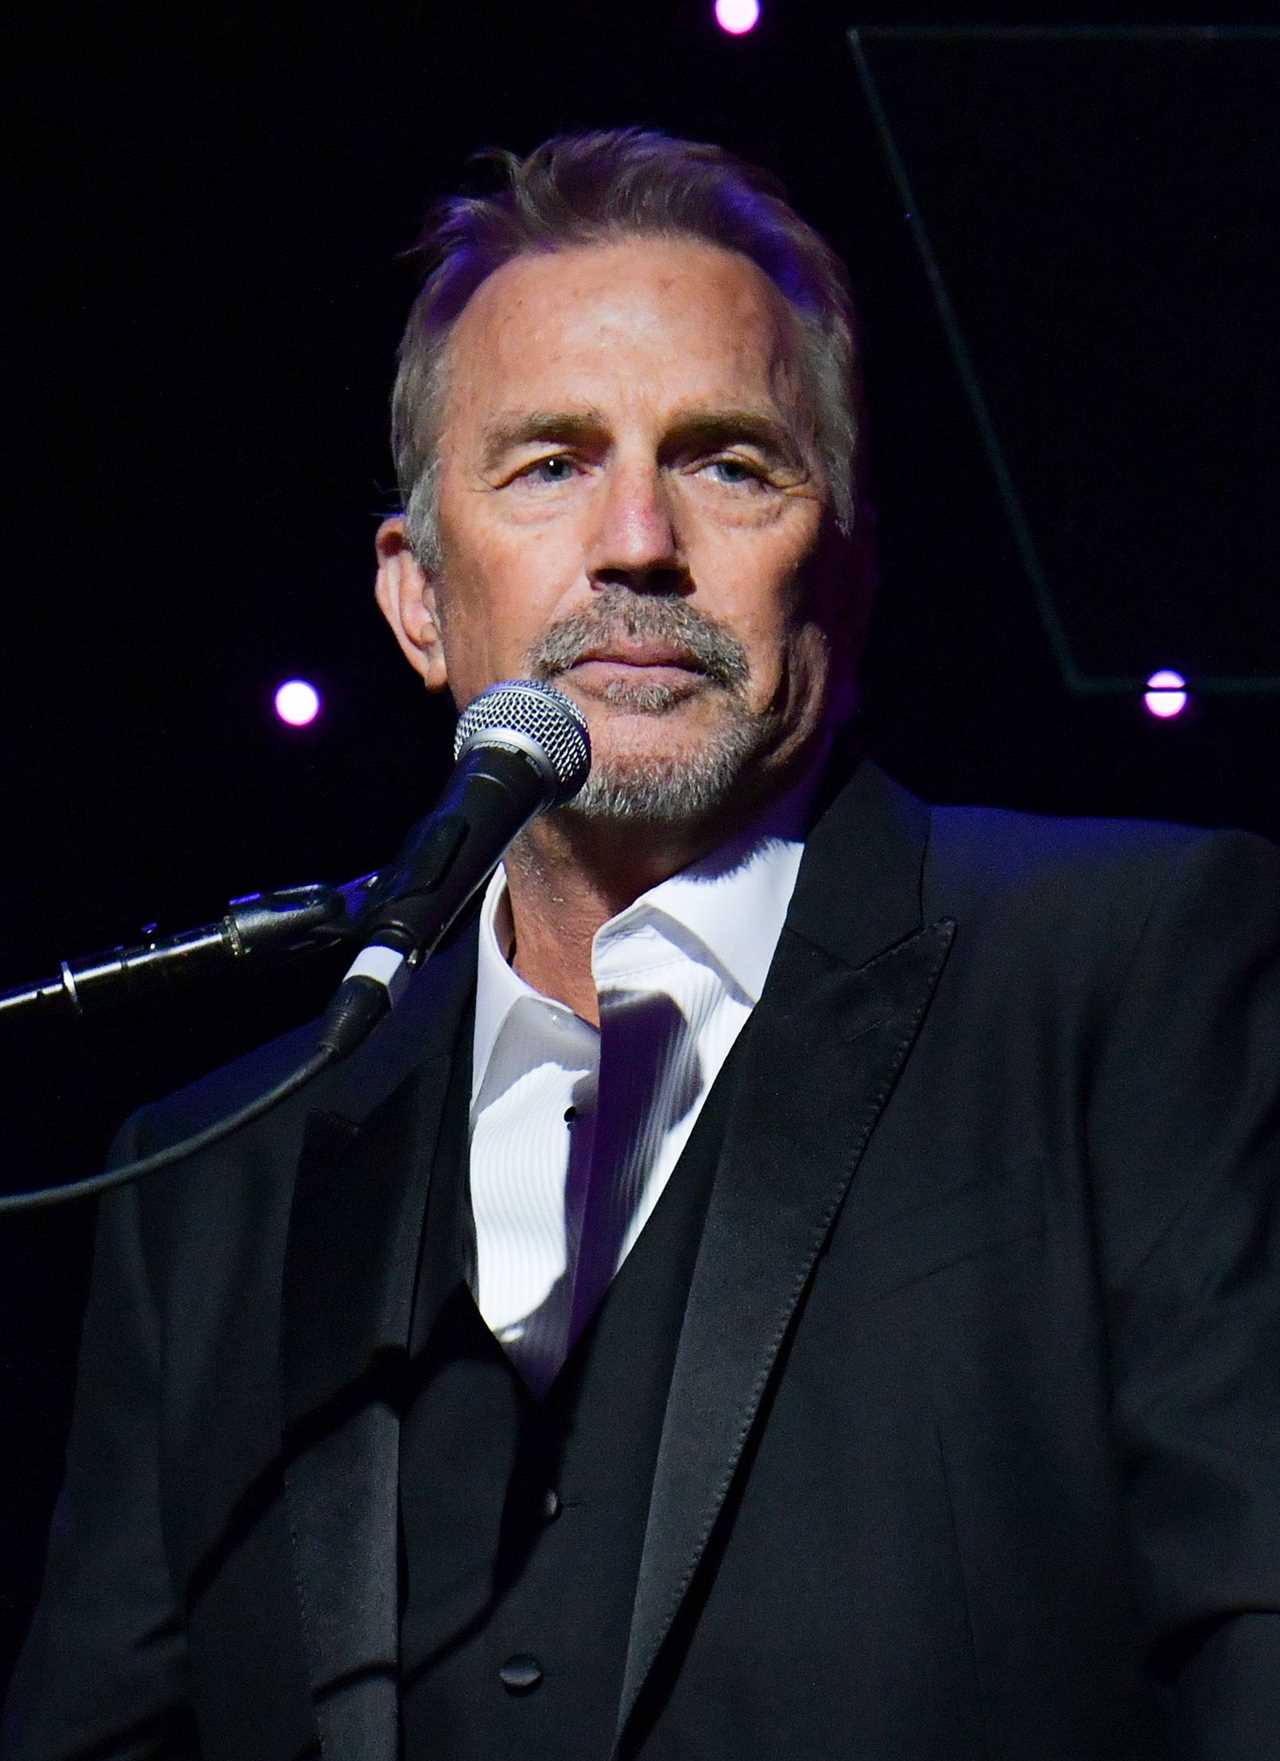 Kevin Costner’s wife files for divorce as Yellowstone actor admits ‘circumstances beyond his control’ led to split